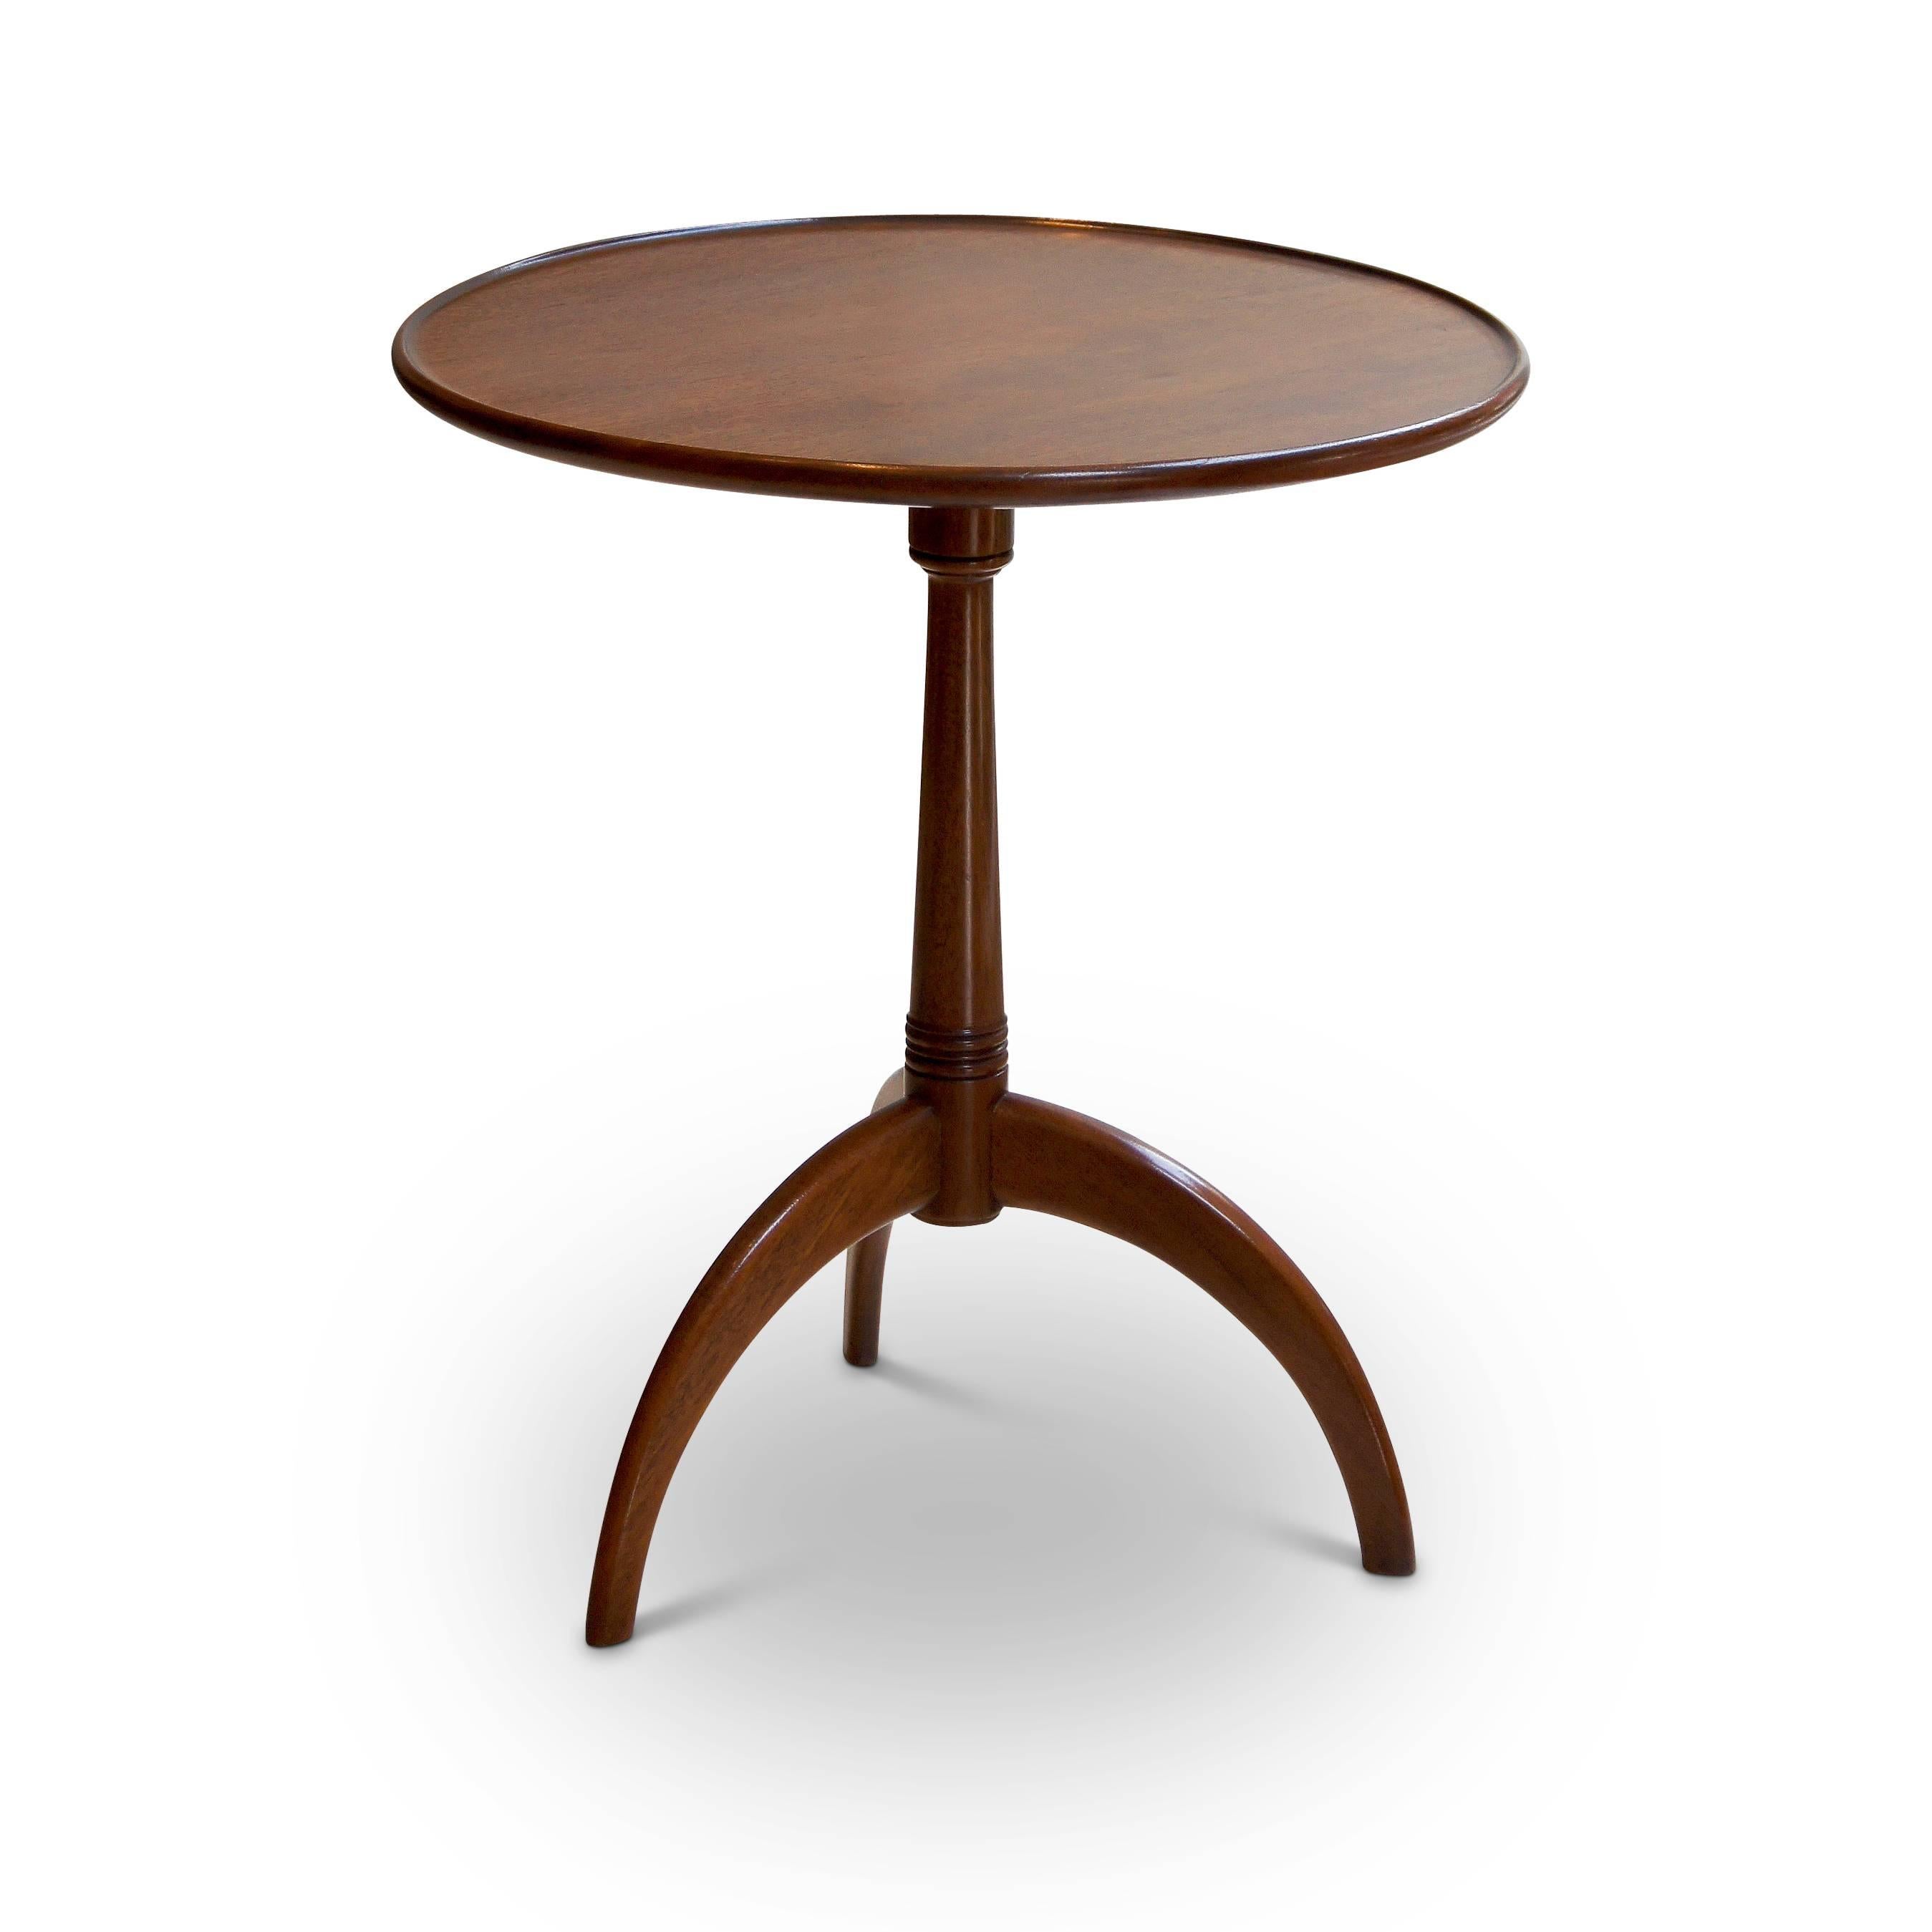 Round occasional / lamp table by Frits Henningsen (1889-1965), having turned pedestal support on trio of dynamically poised legs and carved contouring and lip around top edge. 

This wonderful table is a fine example of both Henningsen's